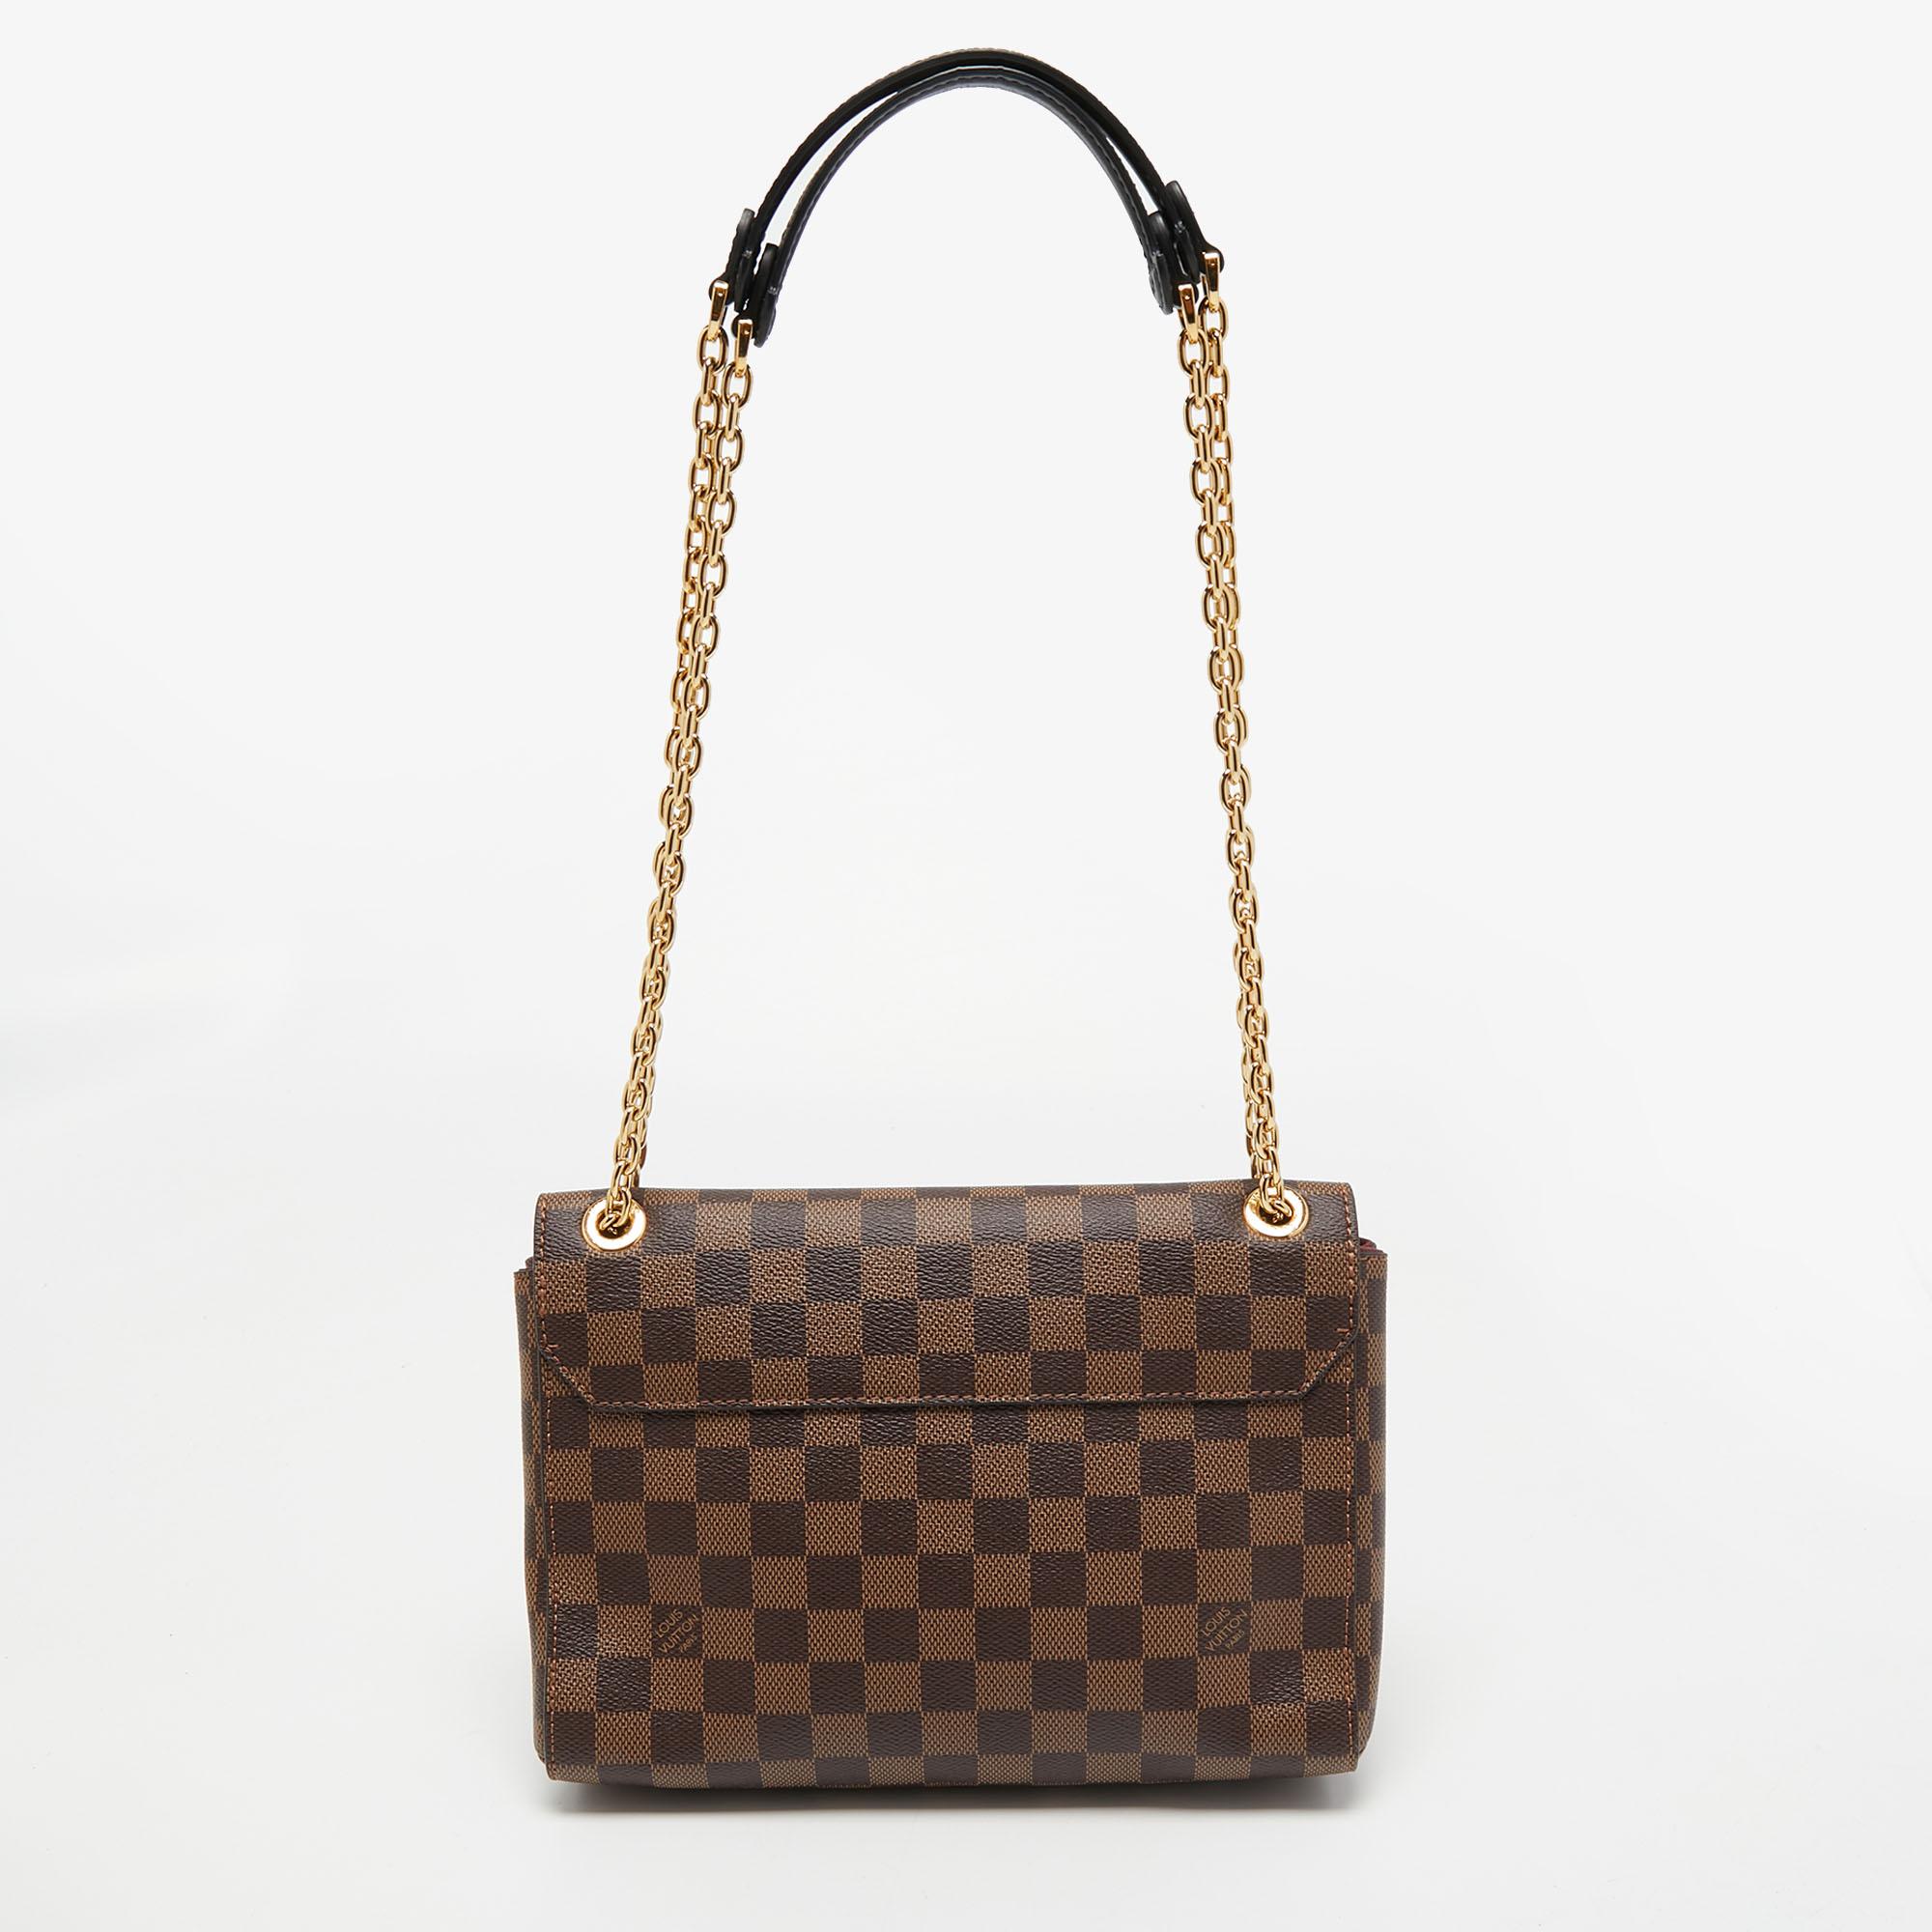 This Louis Vuitton Vavin PM bag has been beautifully crafted using Damier Ebene canvas and Bordeaux leather. The flap is adorned with a branded gold-tone lock, and the top is attached with a sliding chain handle.

Includes: Original Dustbag